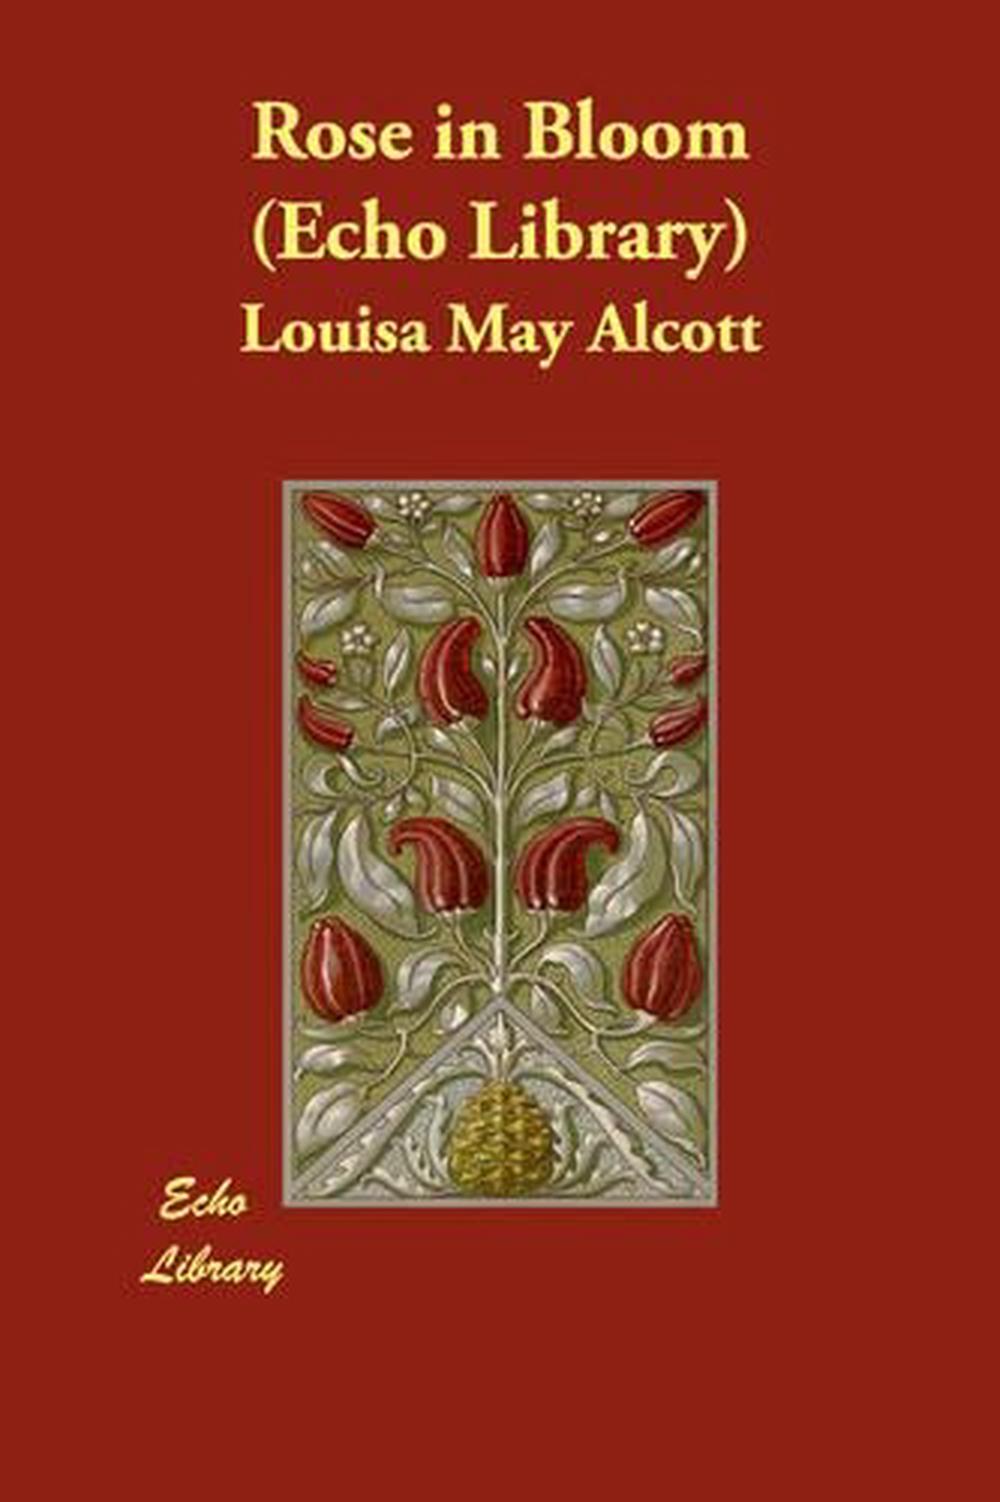 Rose in Bloom (Echo Library) by Louisa May Alcott (English) Paperback Book Free 9781406848403 | eBay